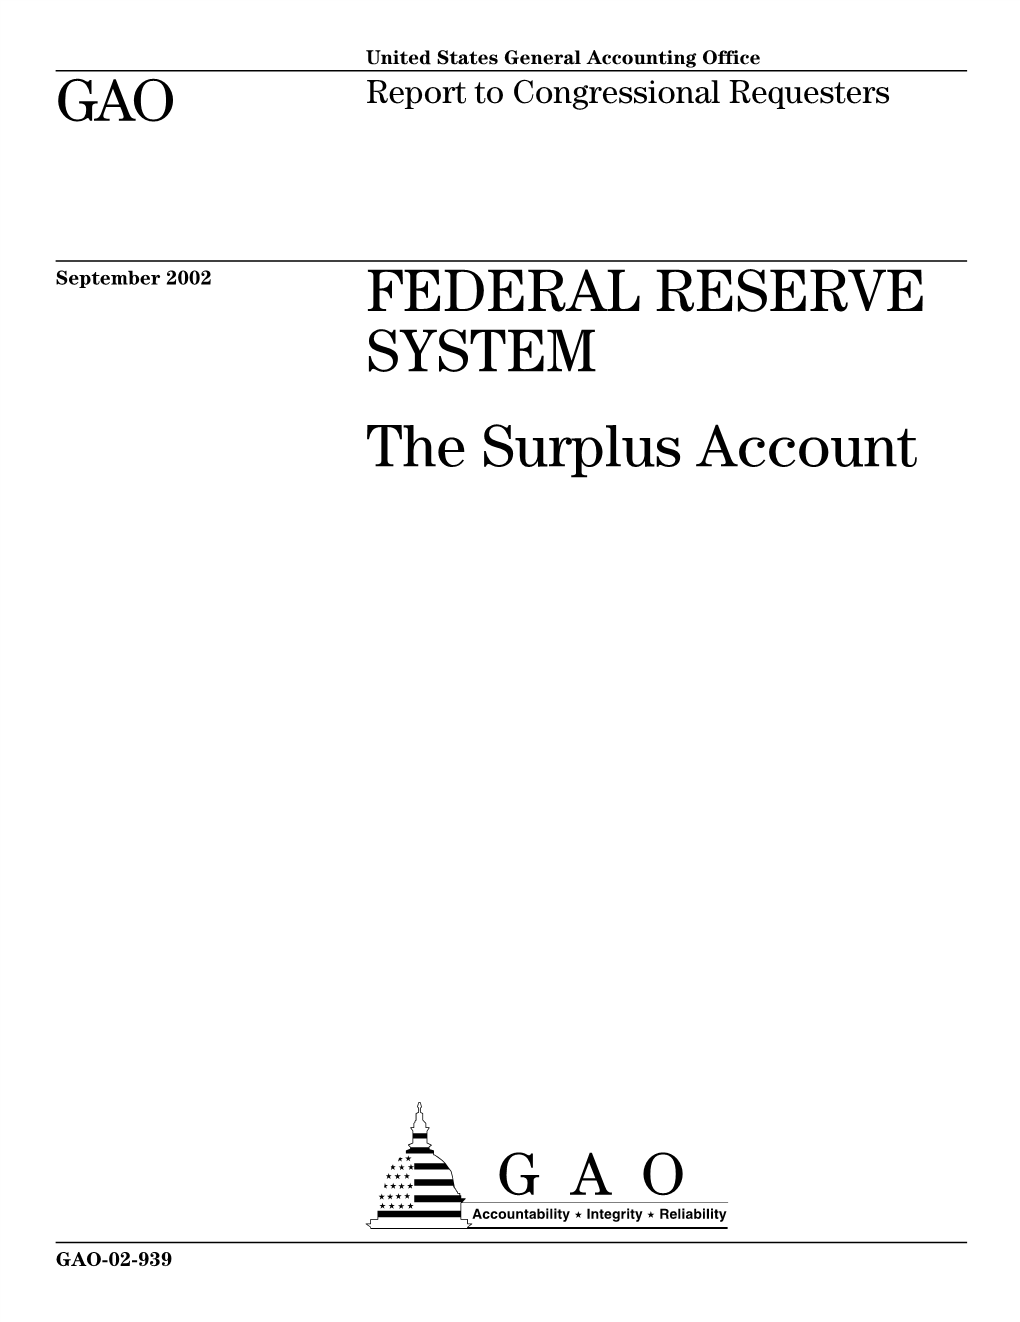 GAO-02-939 Federal Reserve System: the Surplus Account